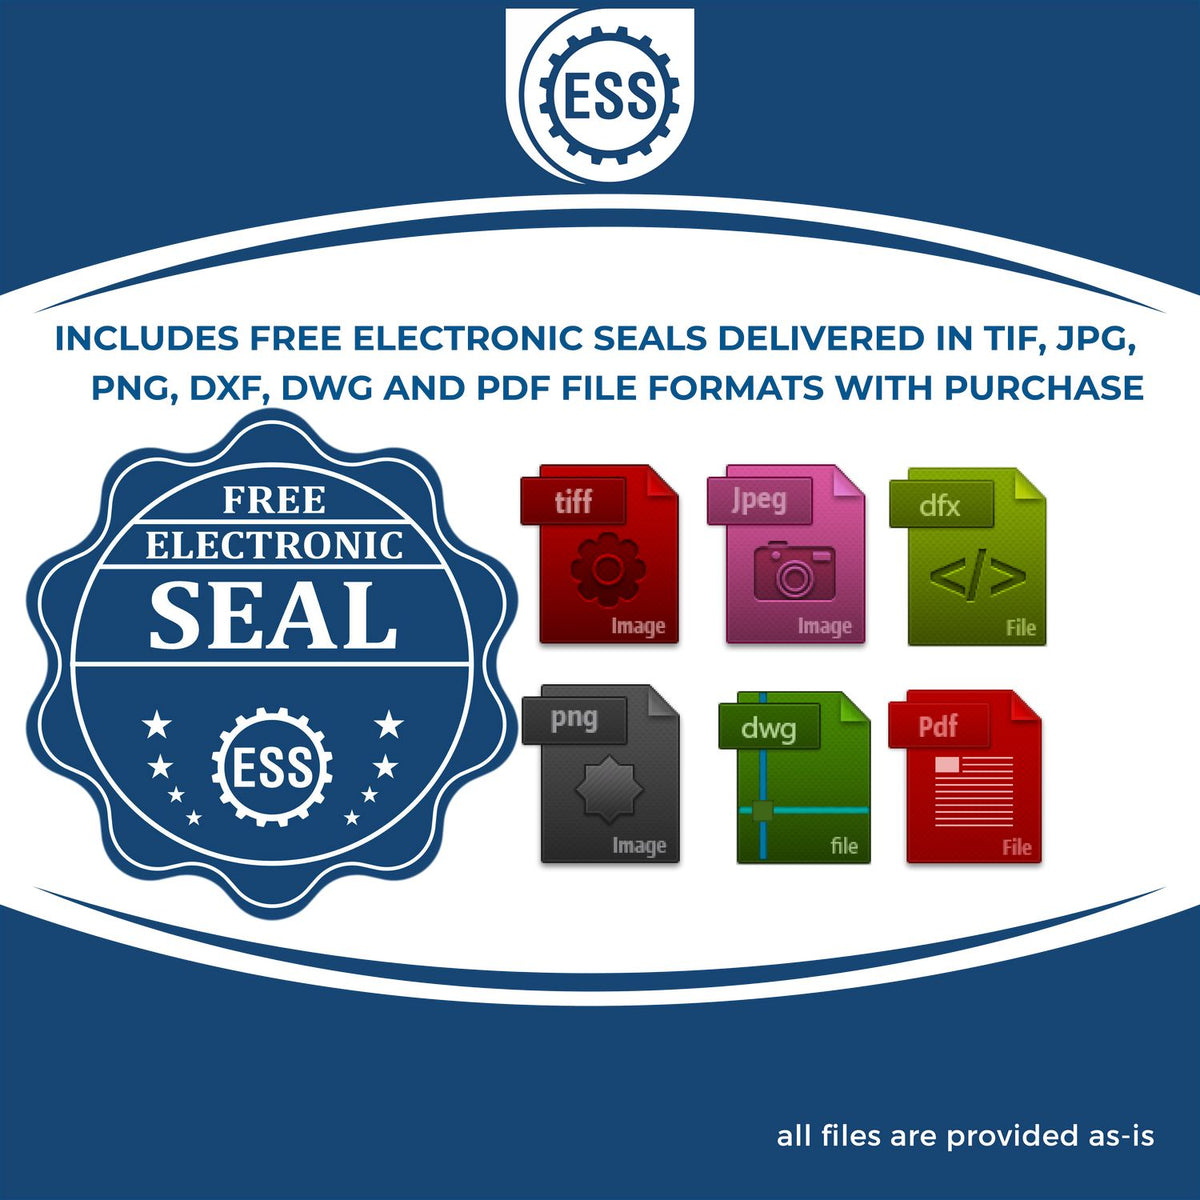 An infographic for the free electronic seal for the Hybrid Montana Geologist Seal illustrating the different file type icons such as DXF, DWG, TIF, JPG and PNG.